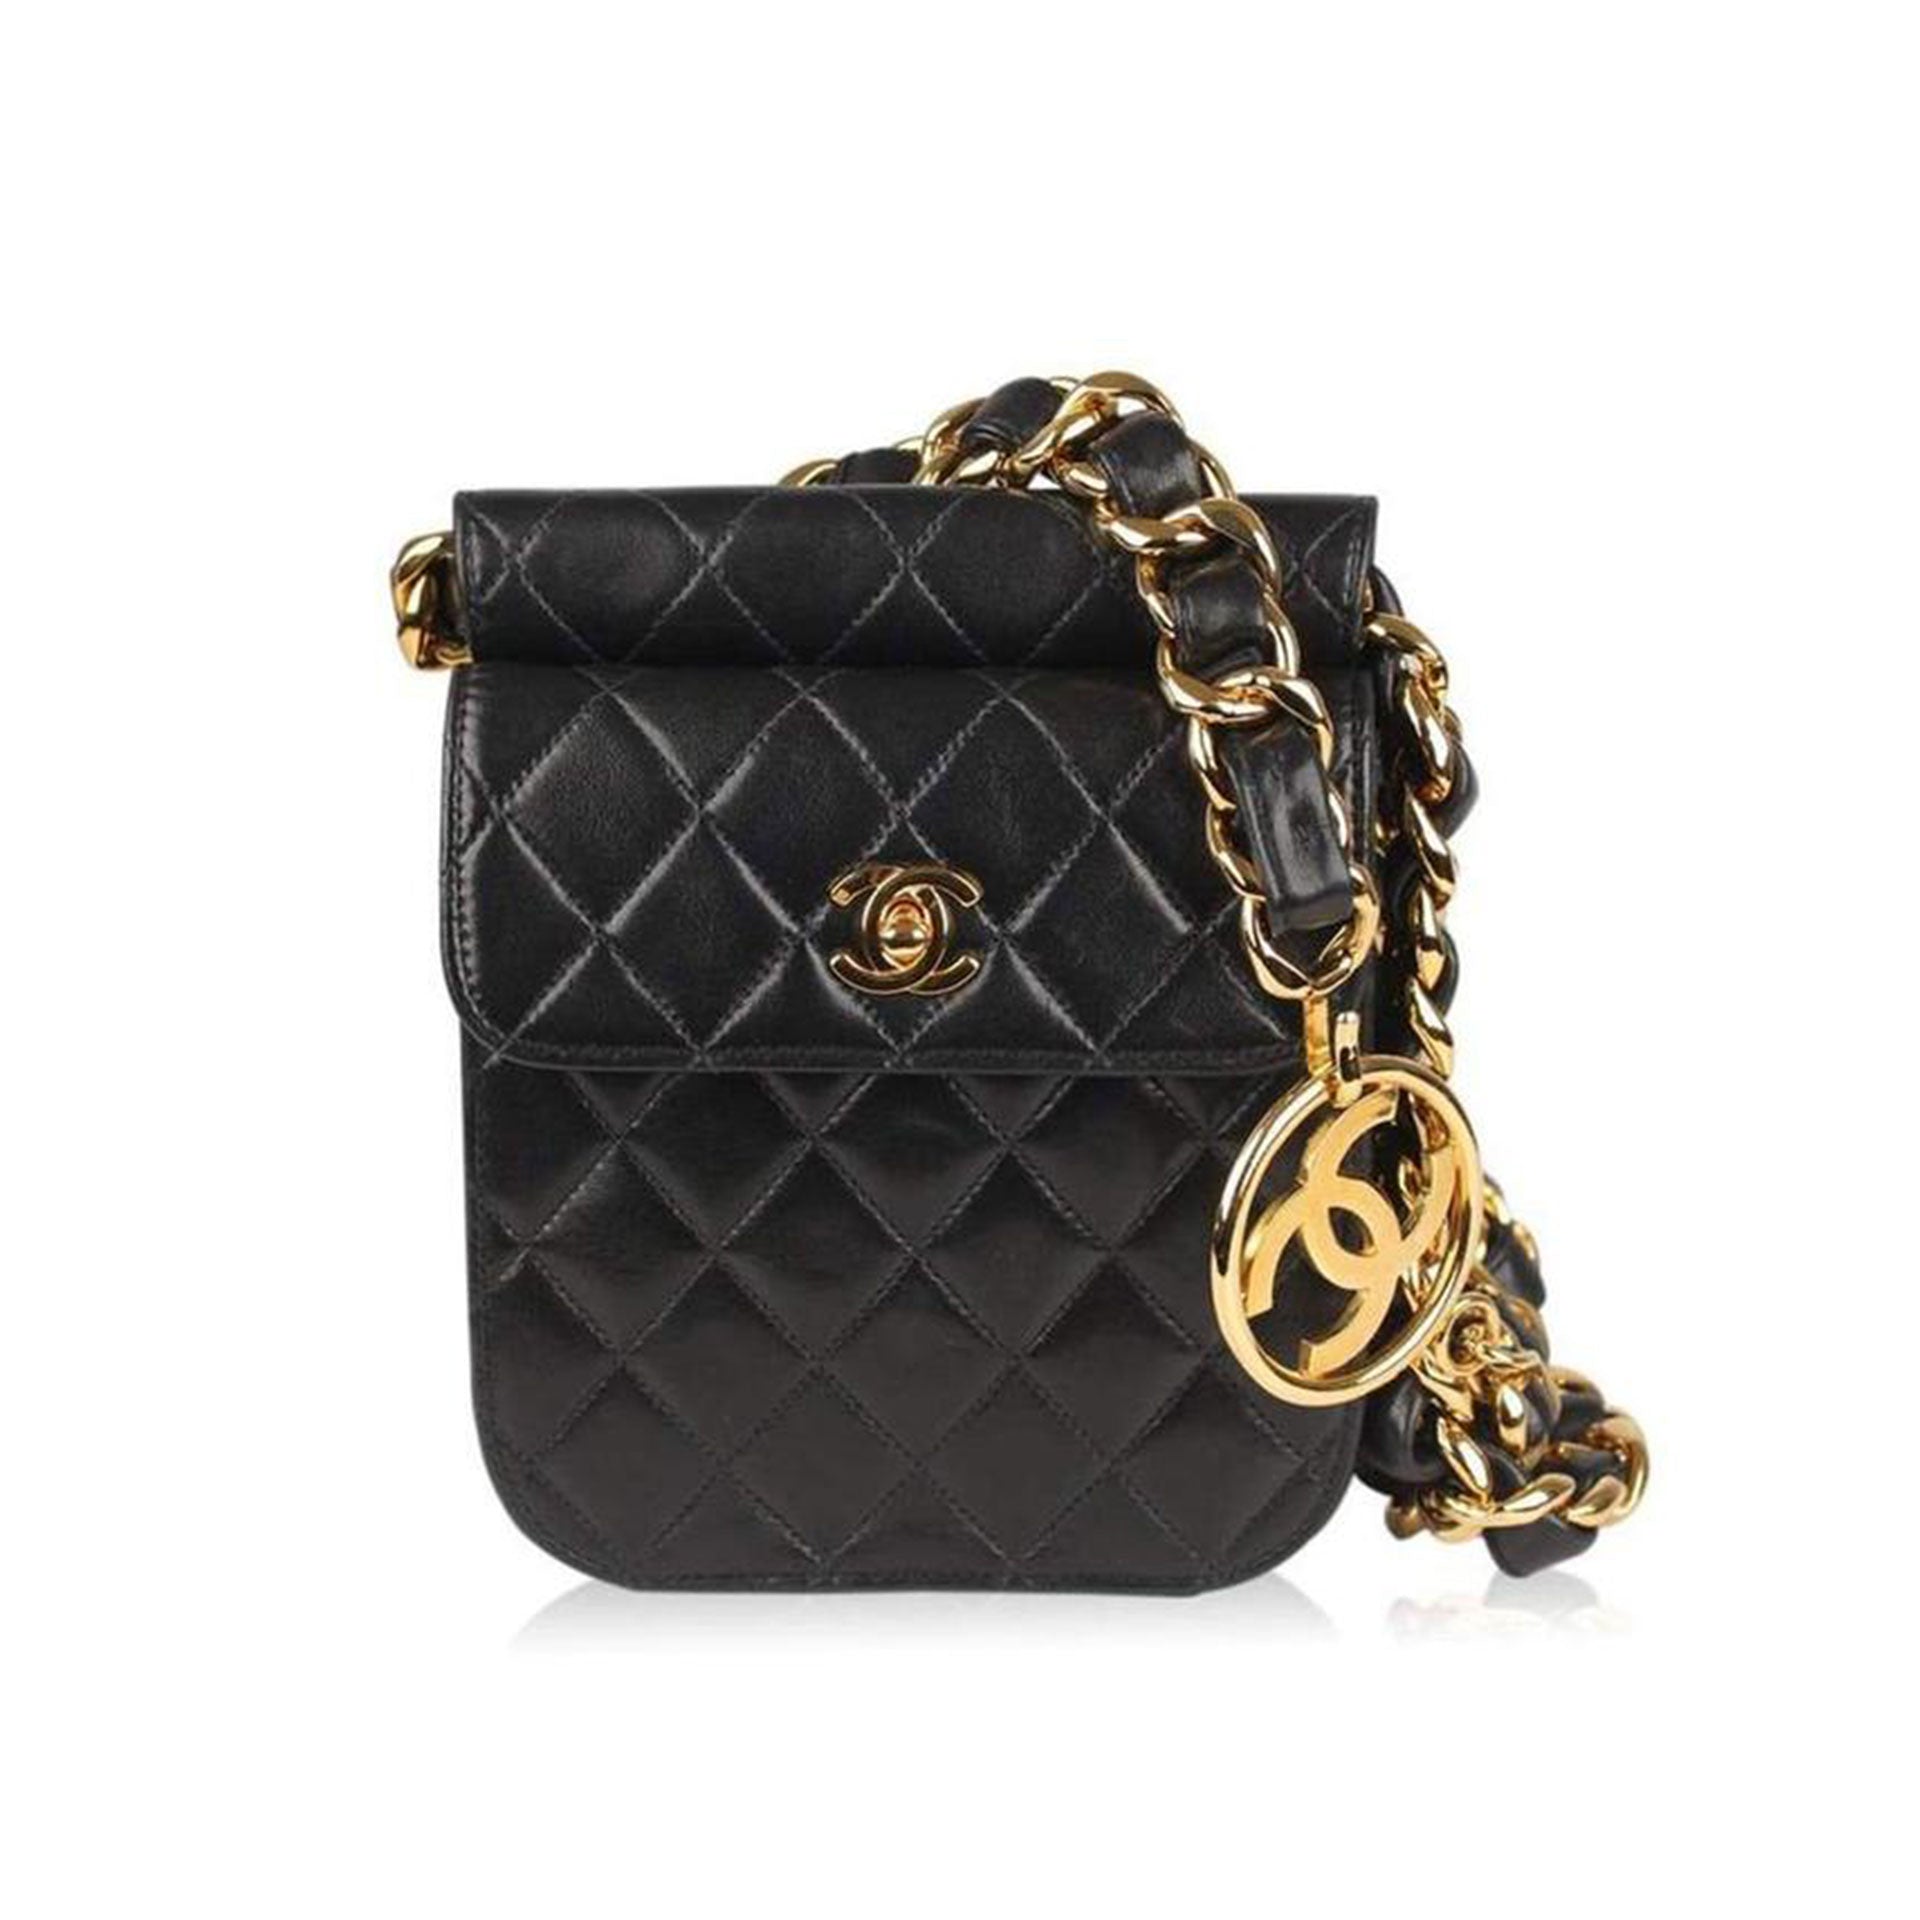 Chanel Business Affinity Waist Belt Bag in Navy Blue Caviar with Champagne  Gold Hardware  SOLD